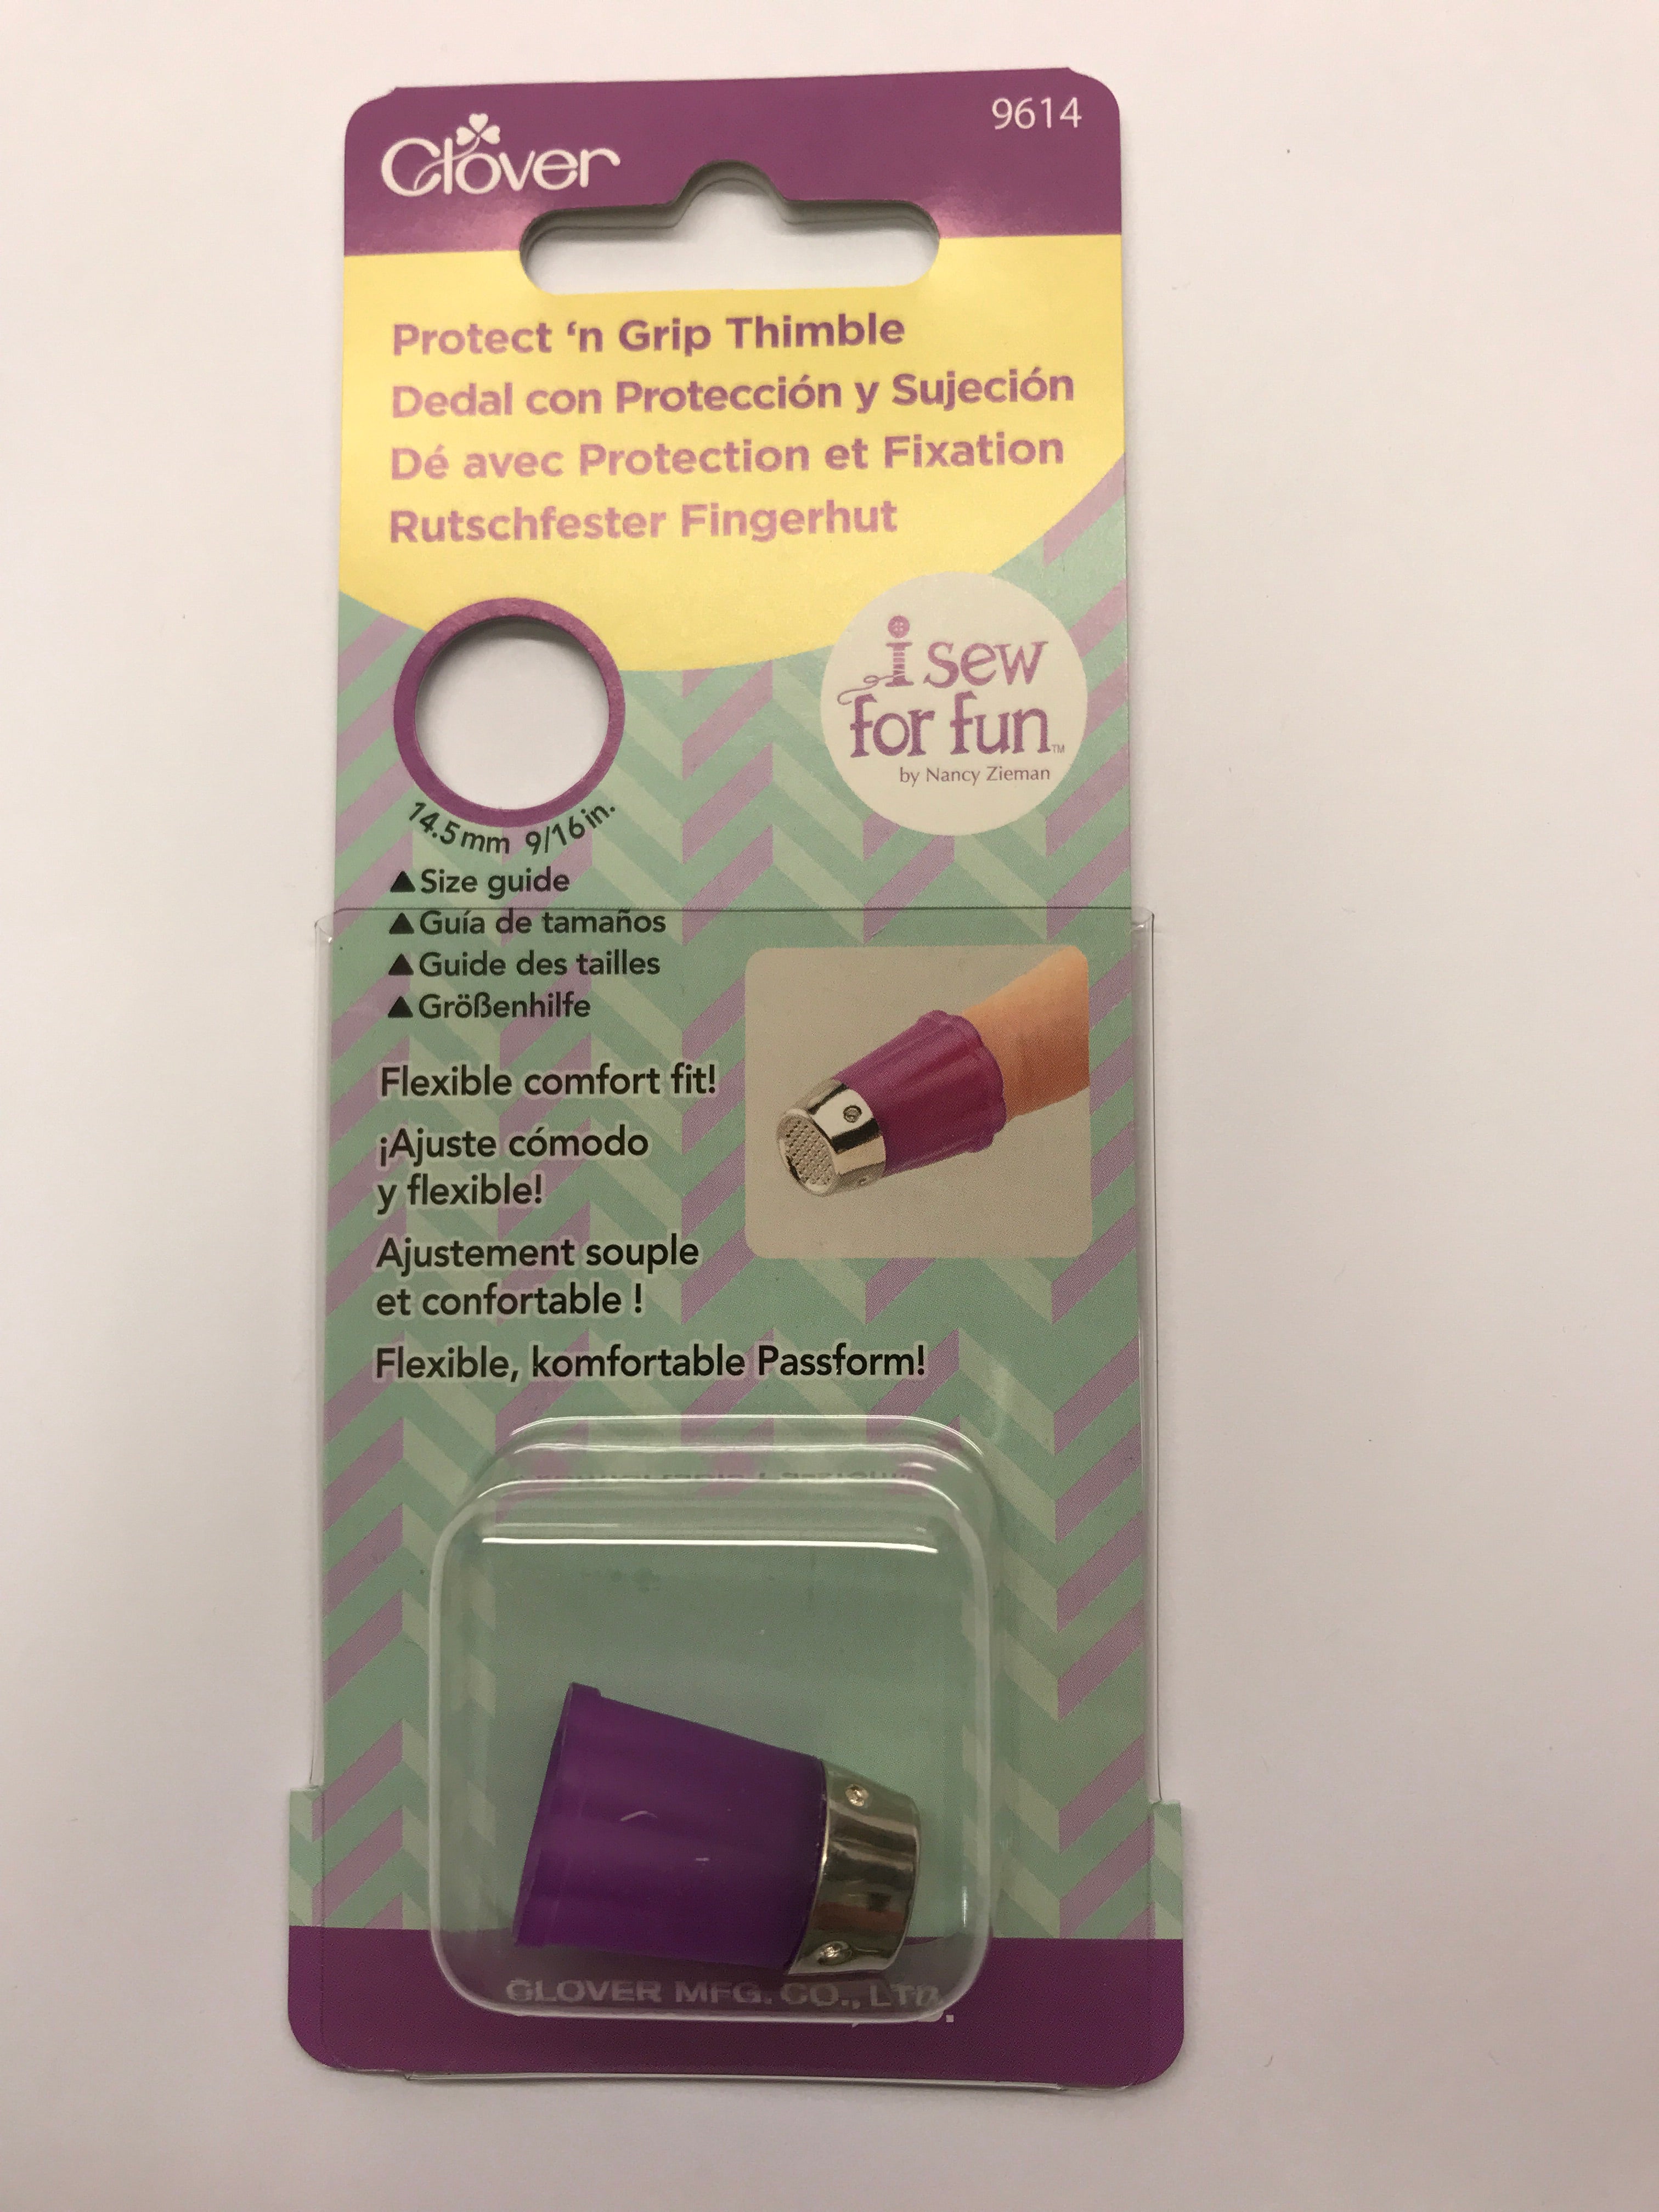 Clover Protect 'n Grip Thimble - 9614